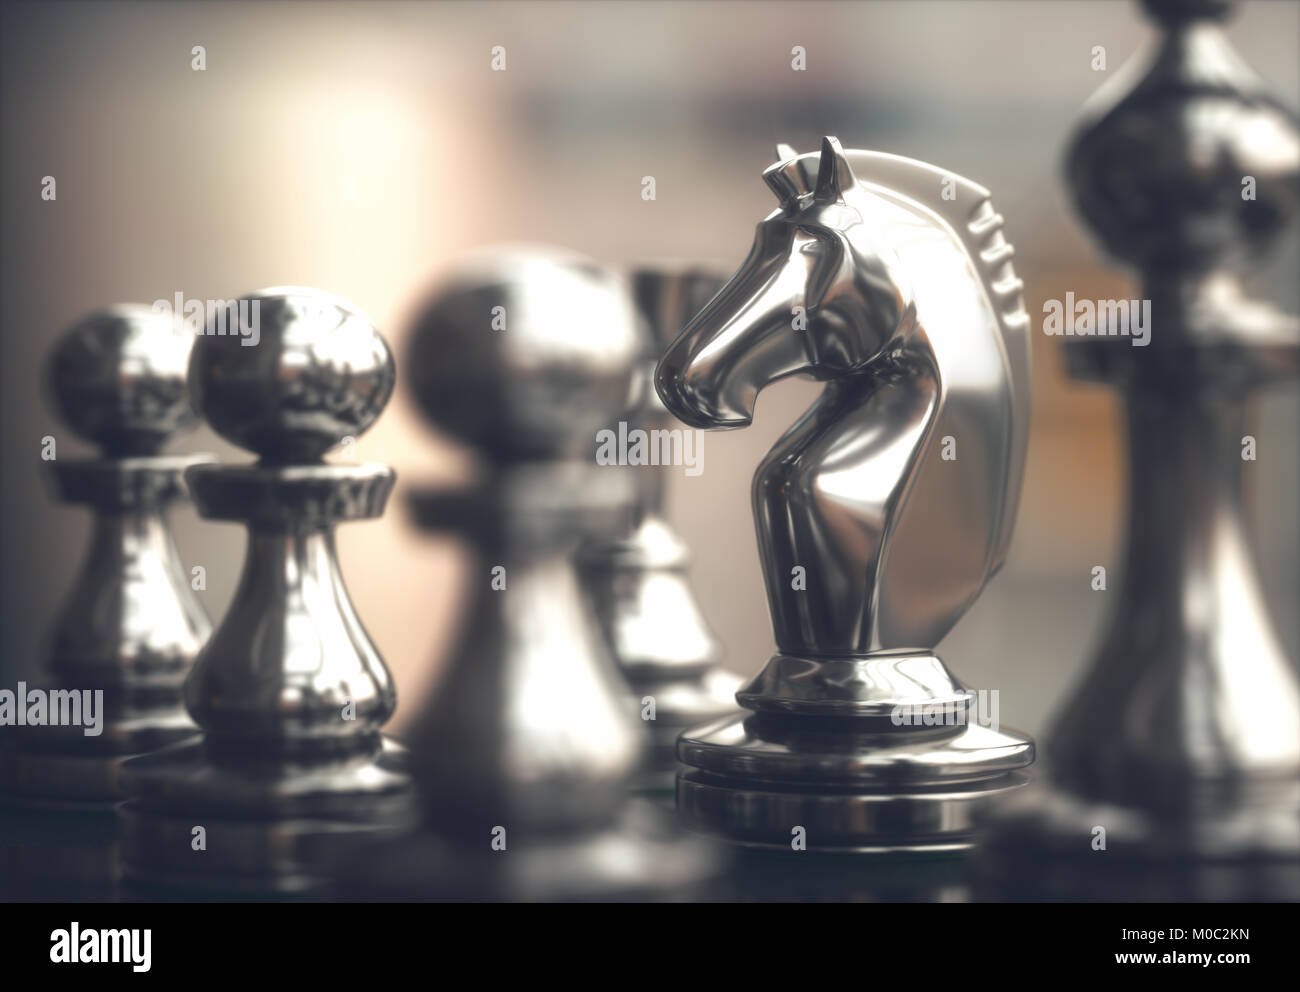 Pieces of chess game, image with shallow depth of field. Stock Photo